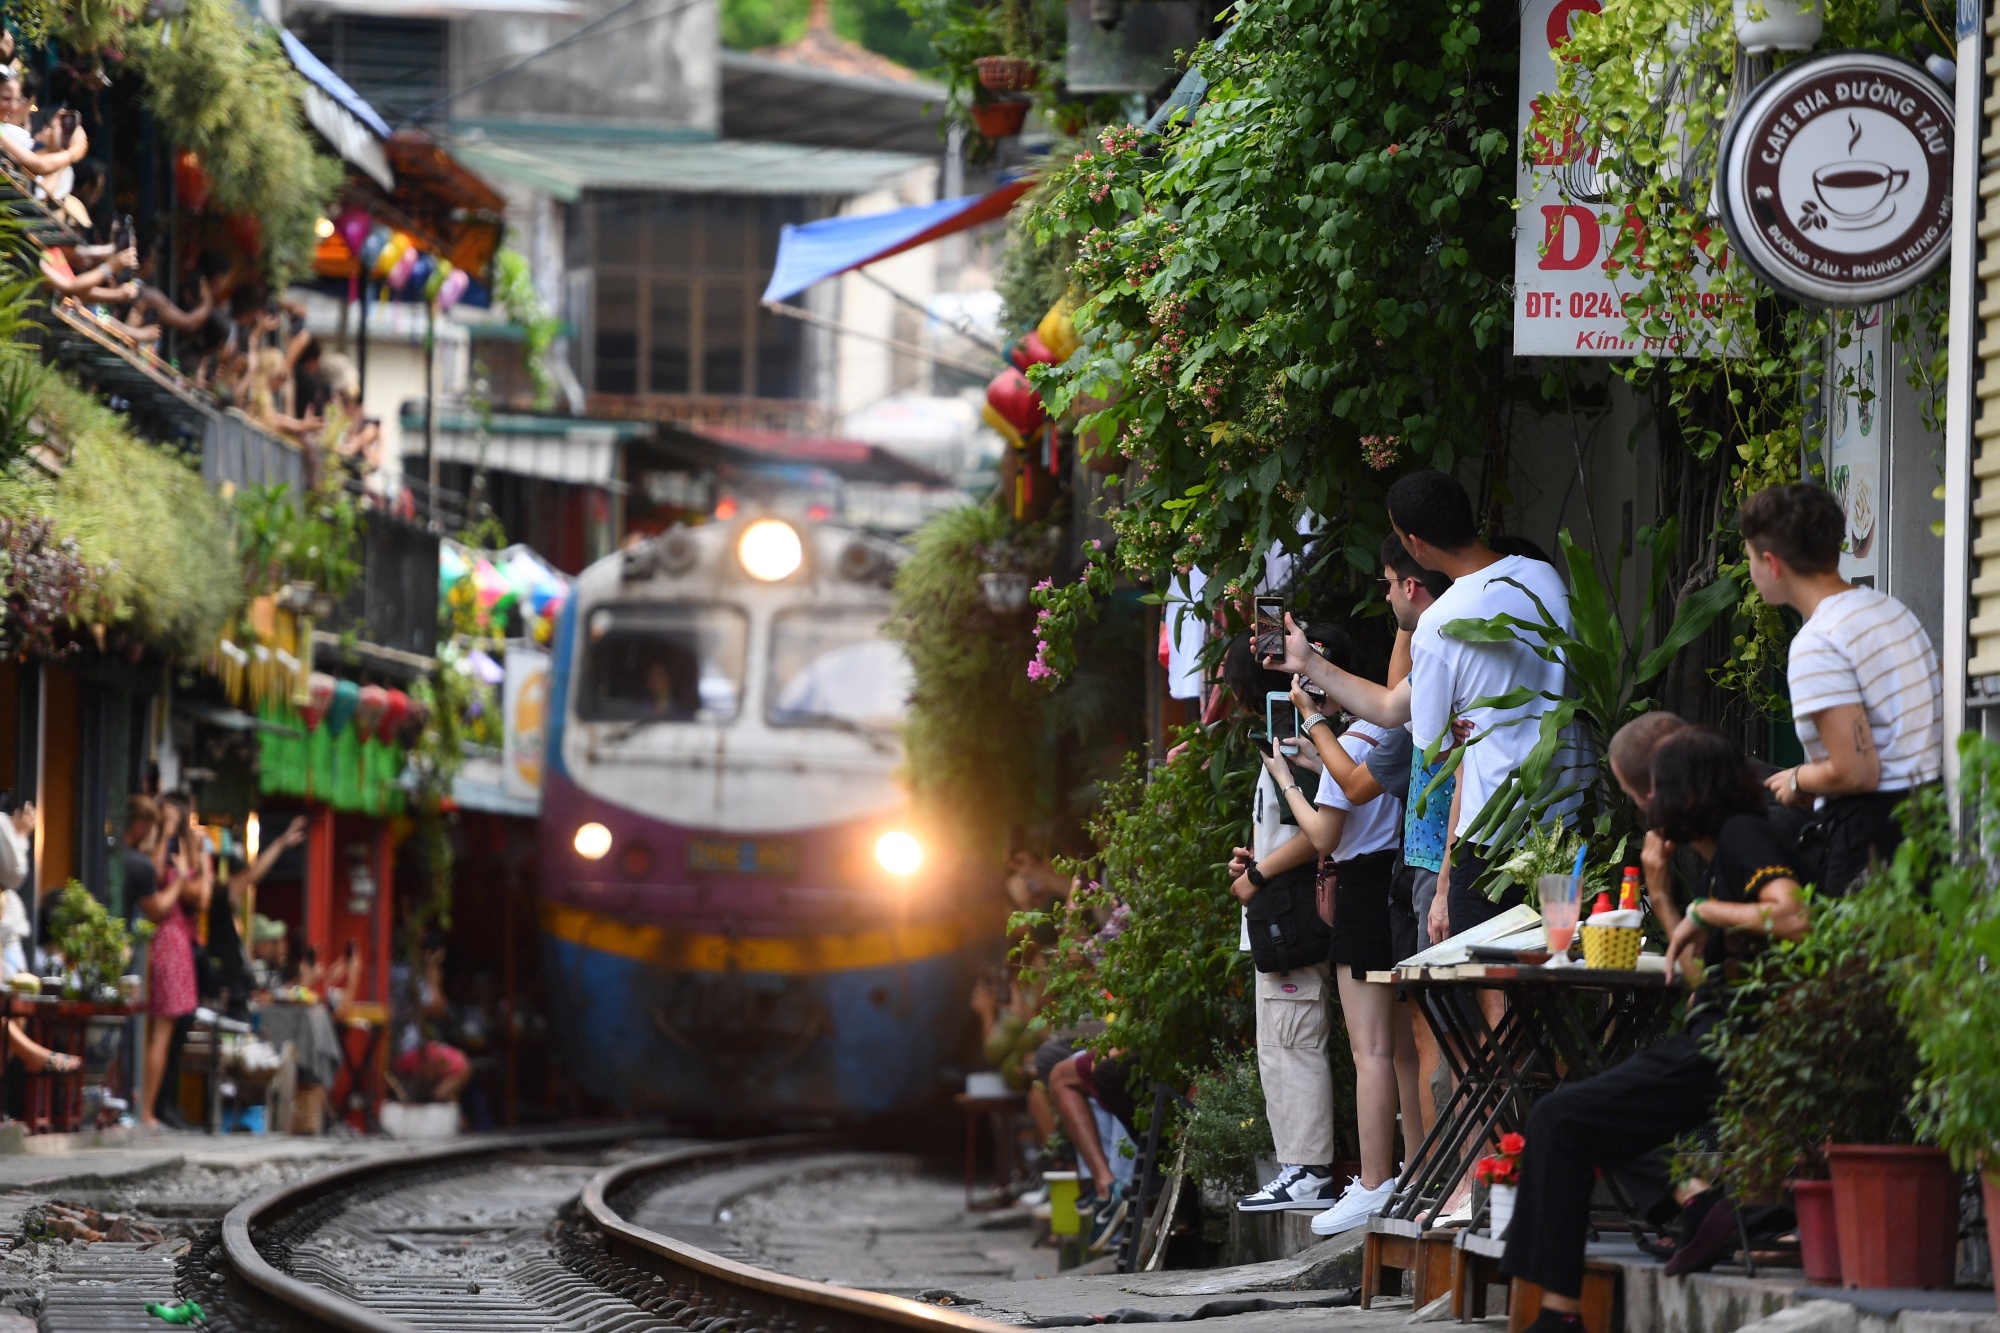 Railway Cafe, one of the best coffee shops in Hanoi, offers an intriguing experience right next to the railway tracks